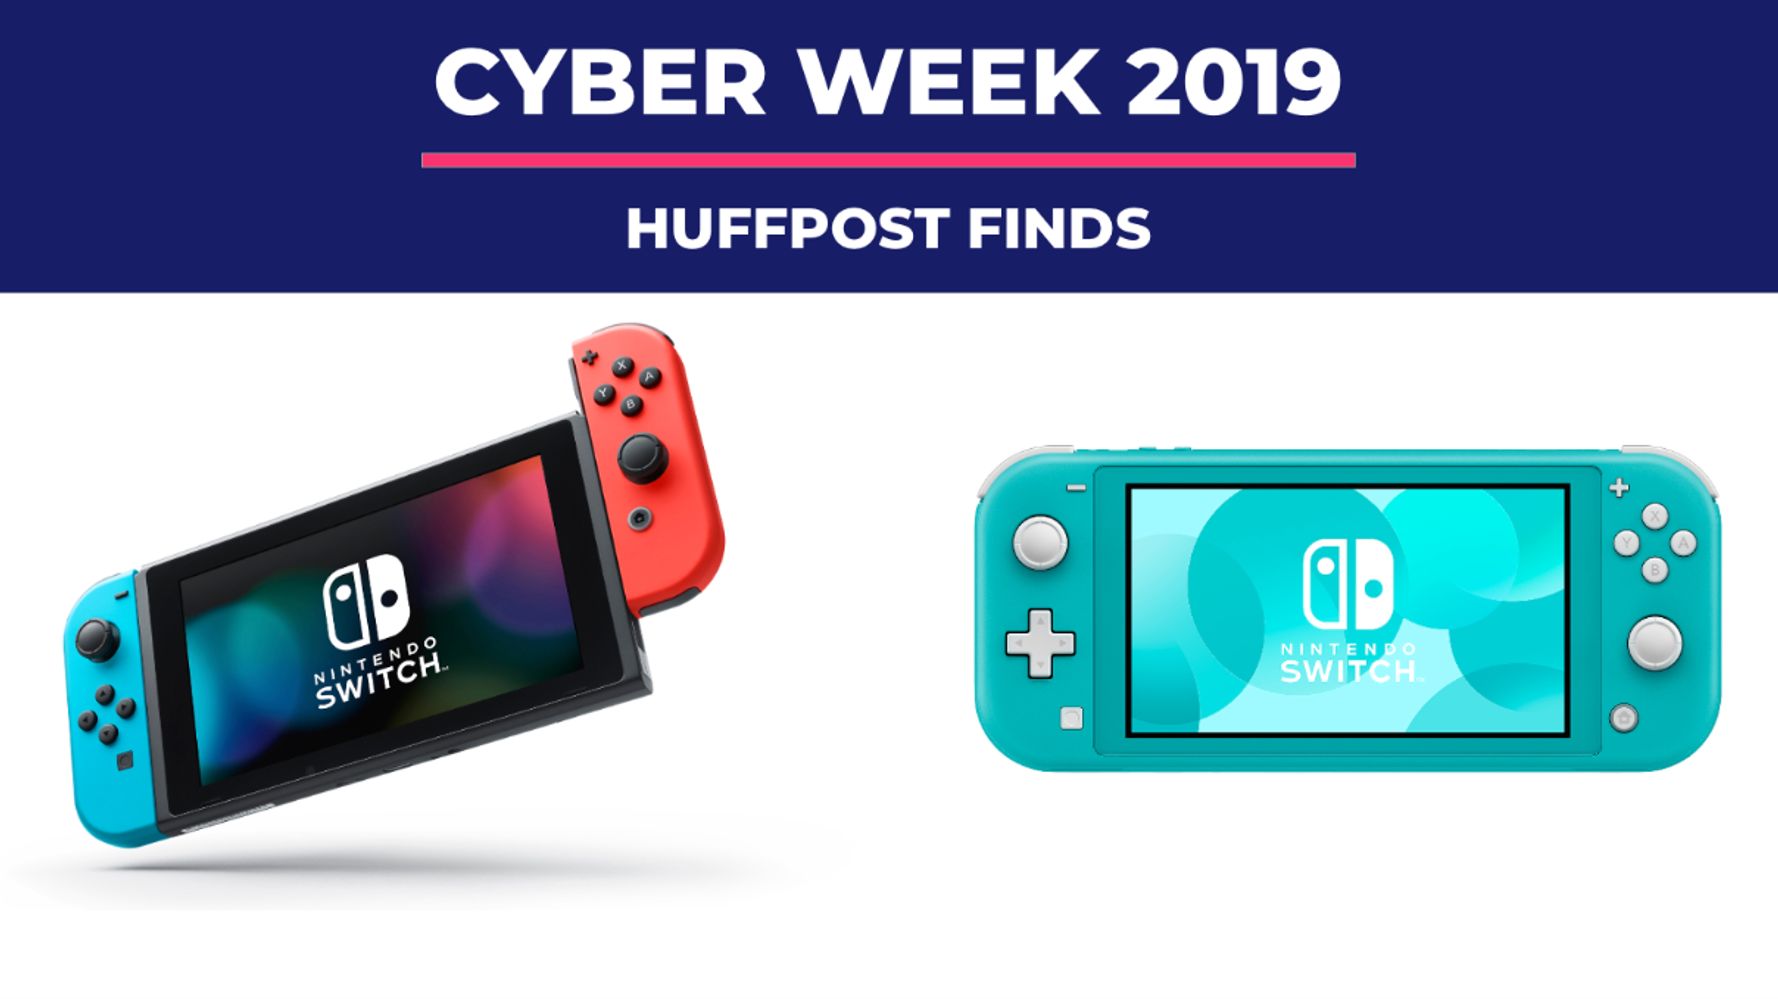 The Best Black Friday Nintendo Switch Deals Of 2019 | HuffPost Canada Home & Living